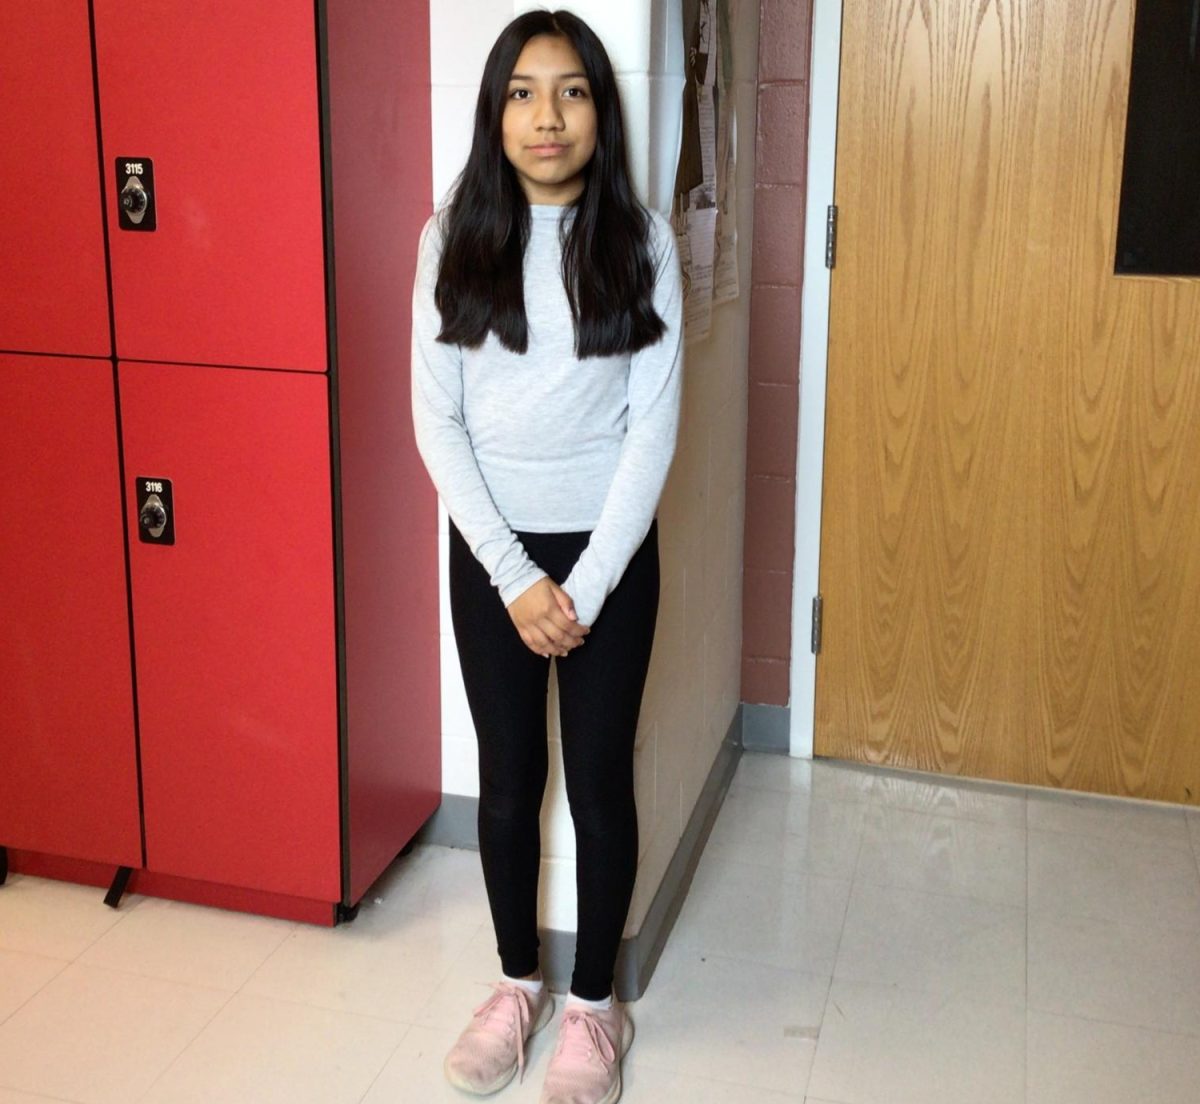 Nathaly poses for a picture in the hallway.